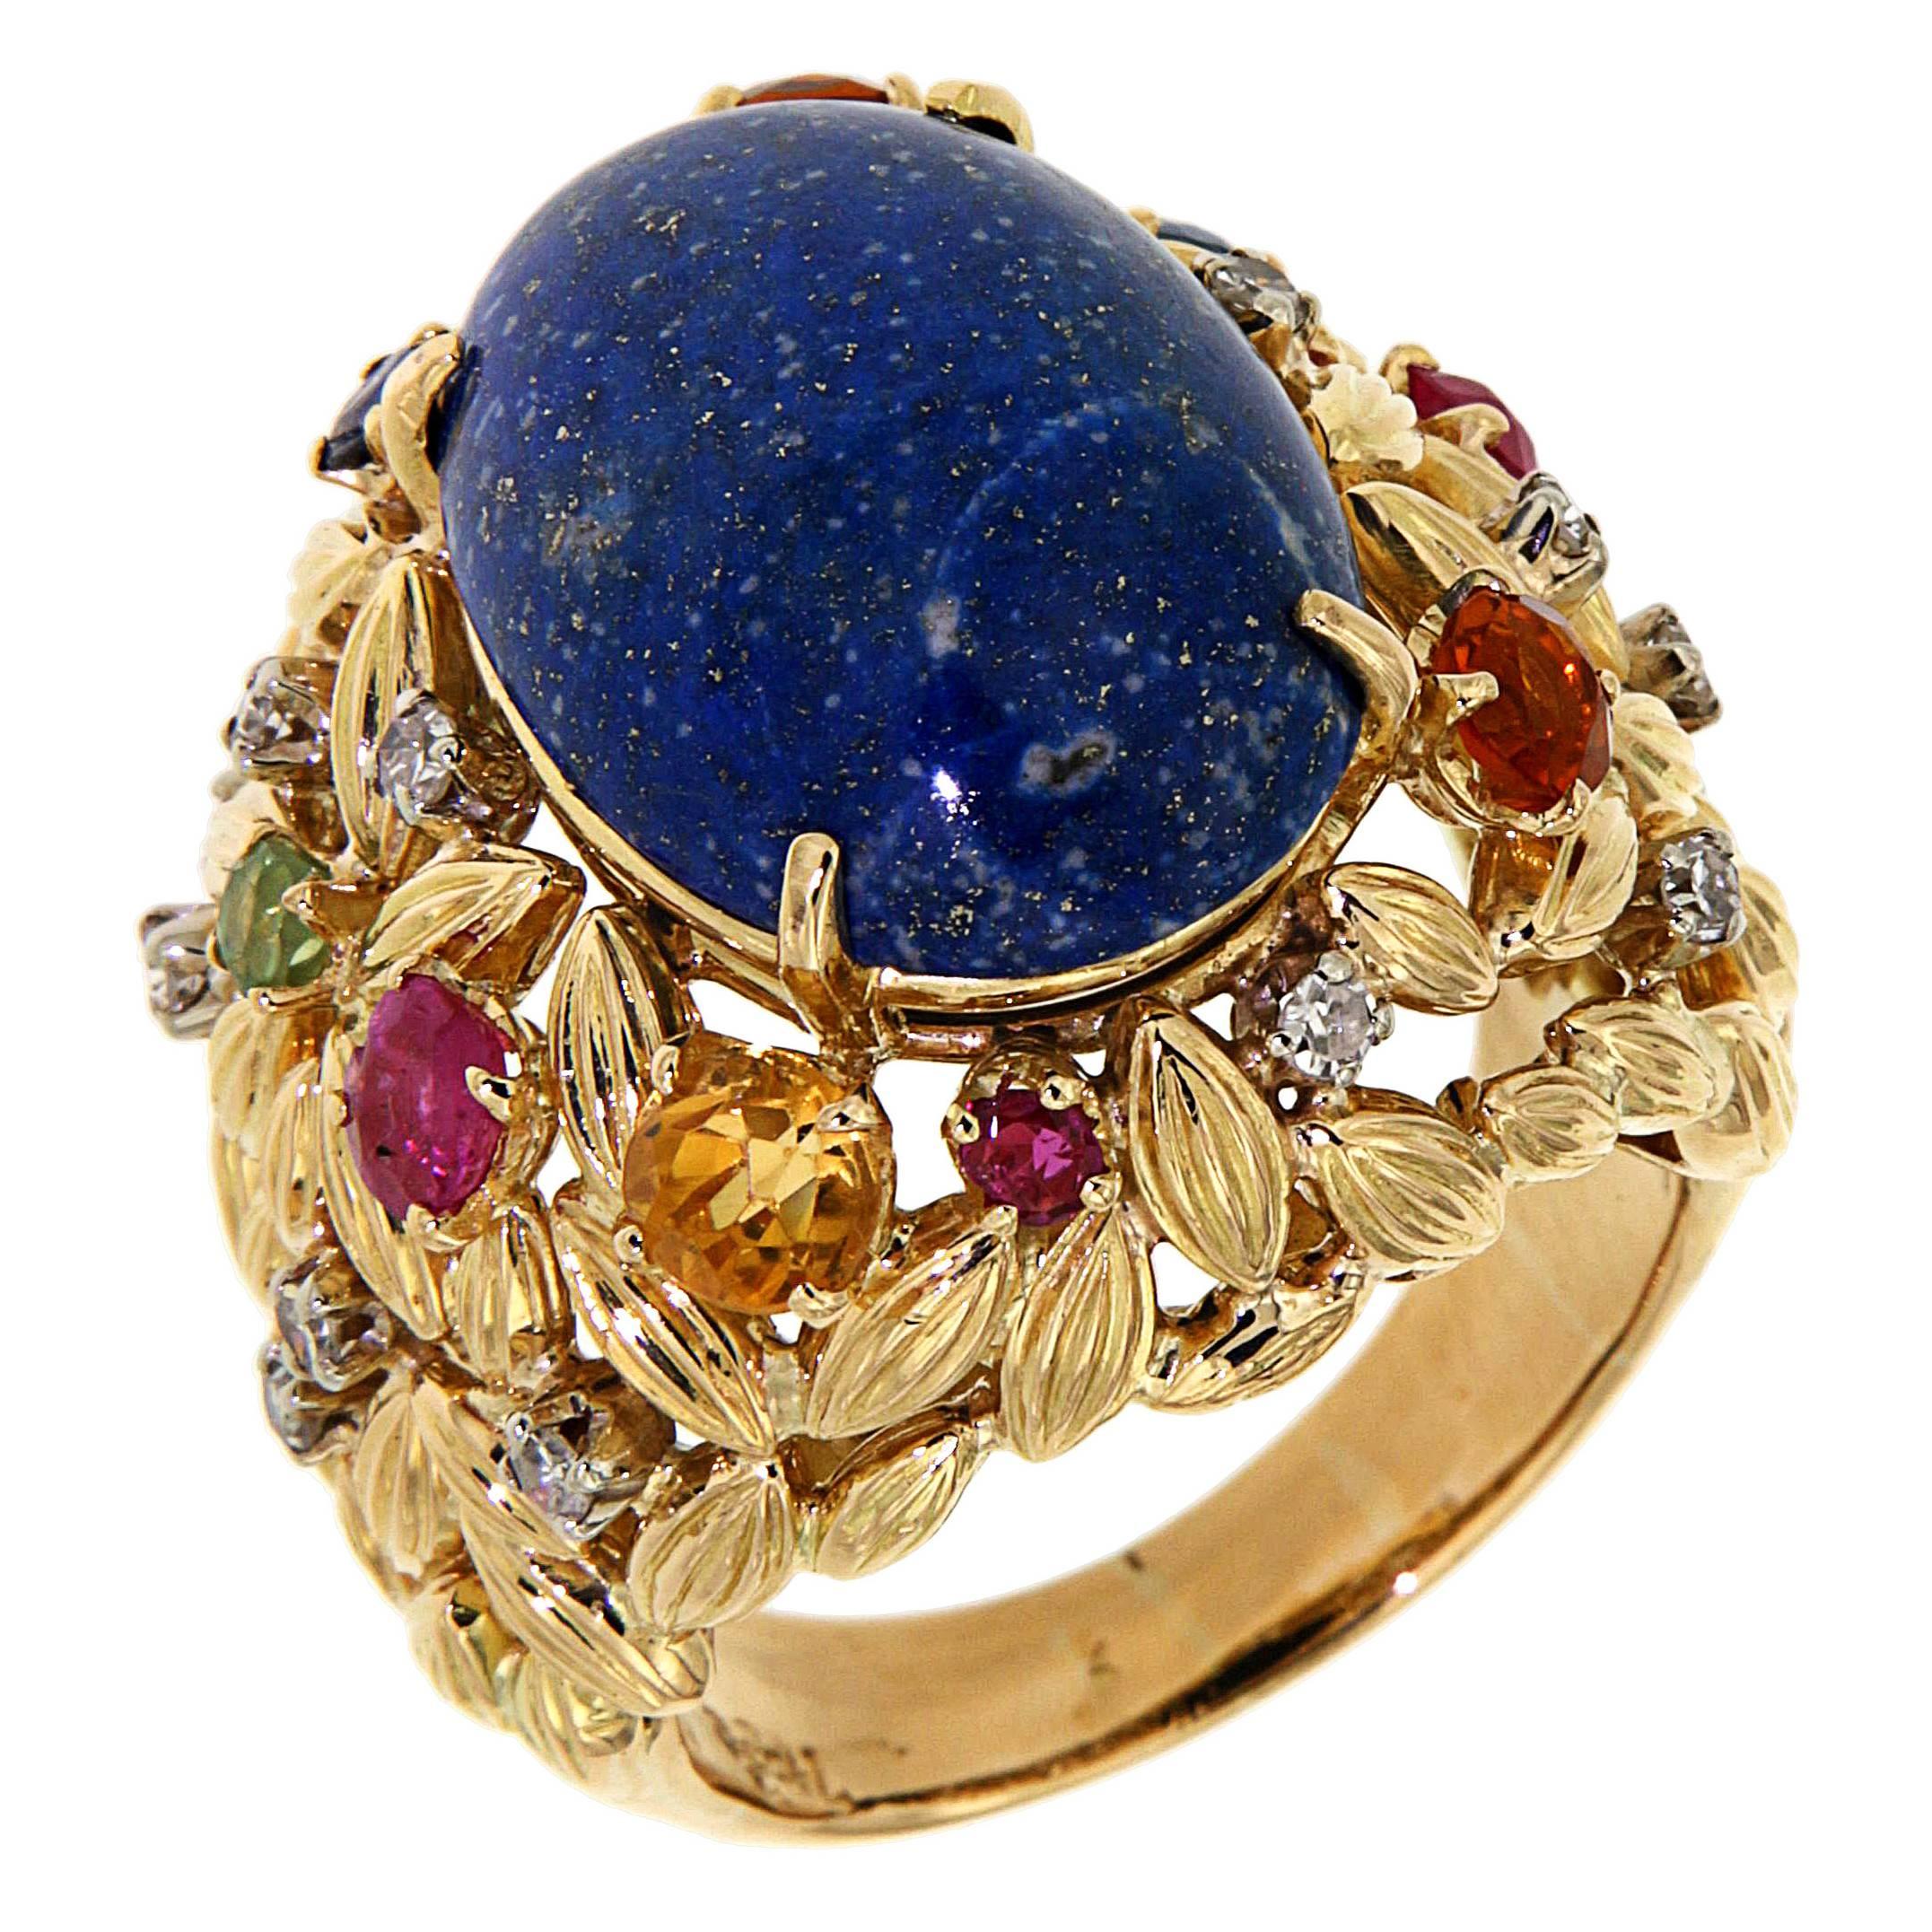 Blue Lapis Yellow Gold Dome Ring 1960s Diamonds Sapphires Rubies